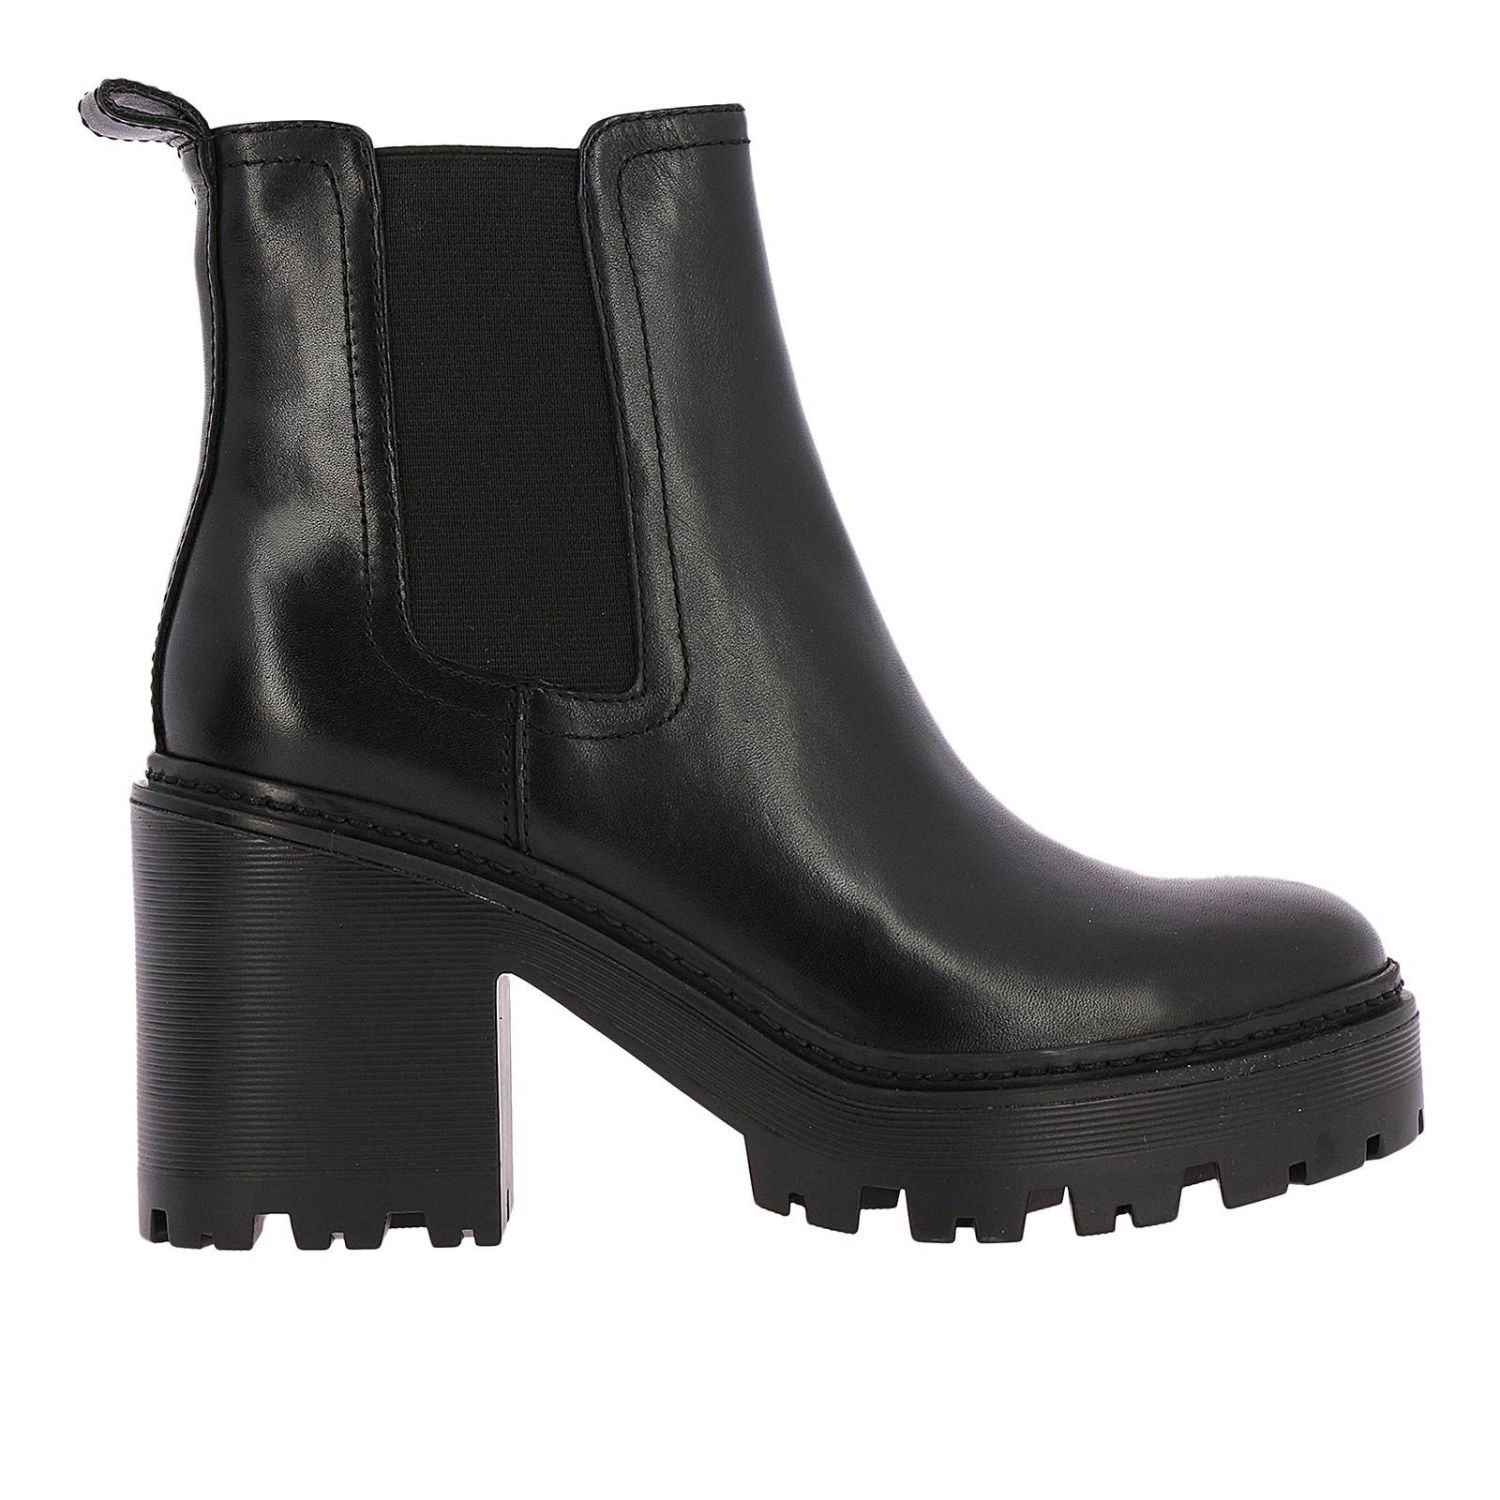 Kendall + Kylie Outlet: Shoes women - Black | Heeled Ankle Boots ...